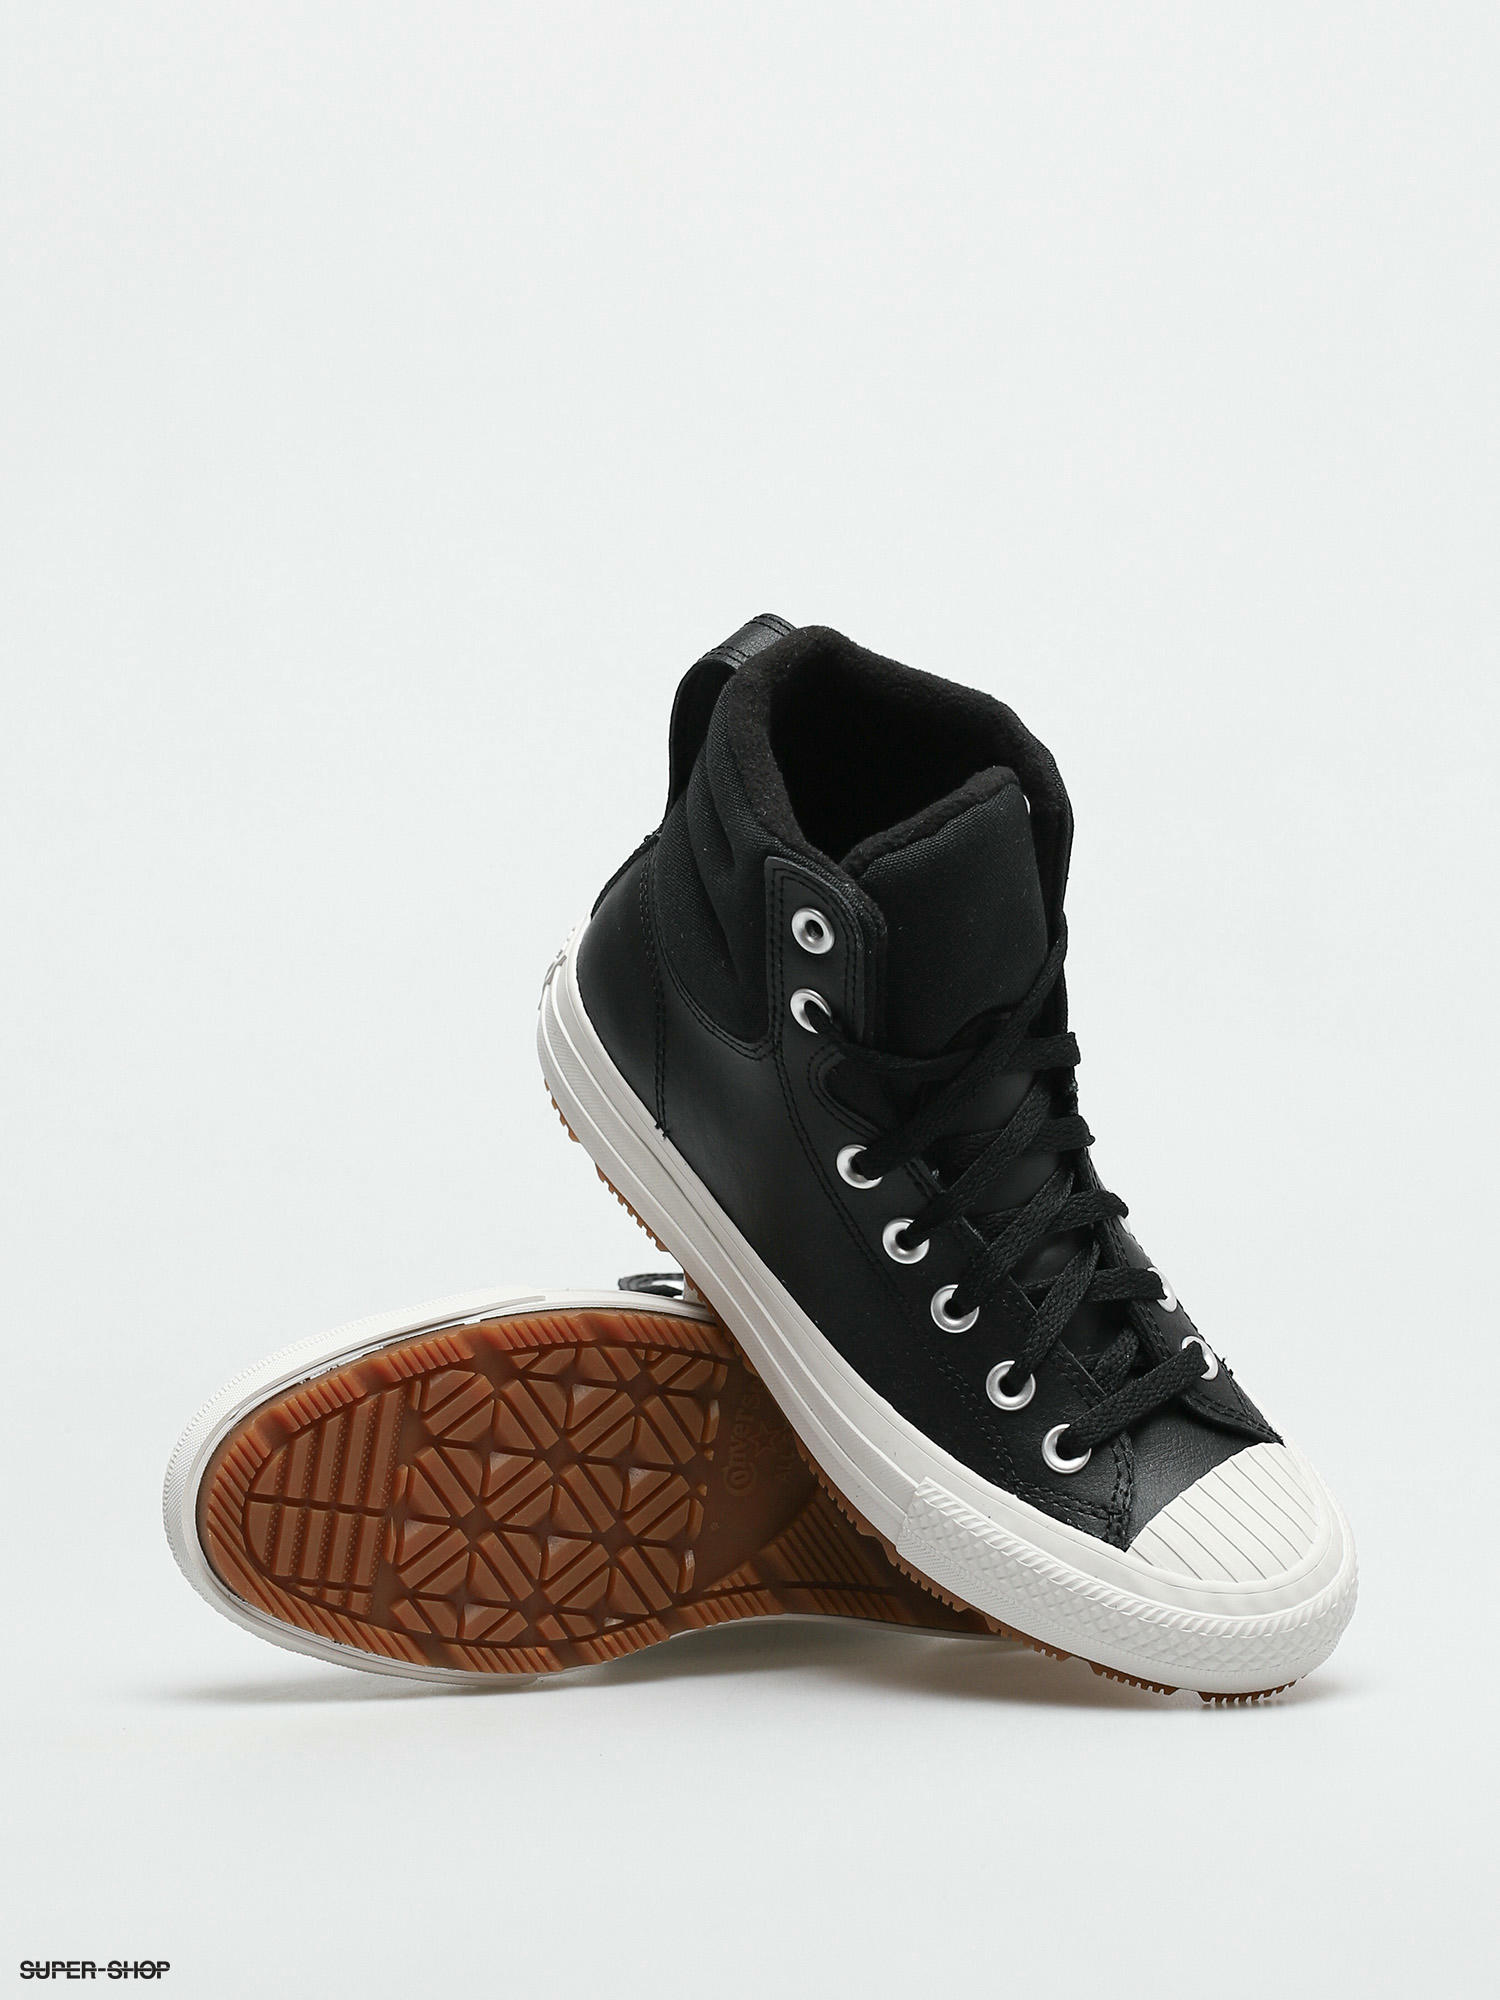 converse all star black boots